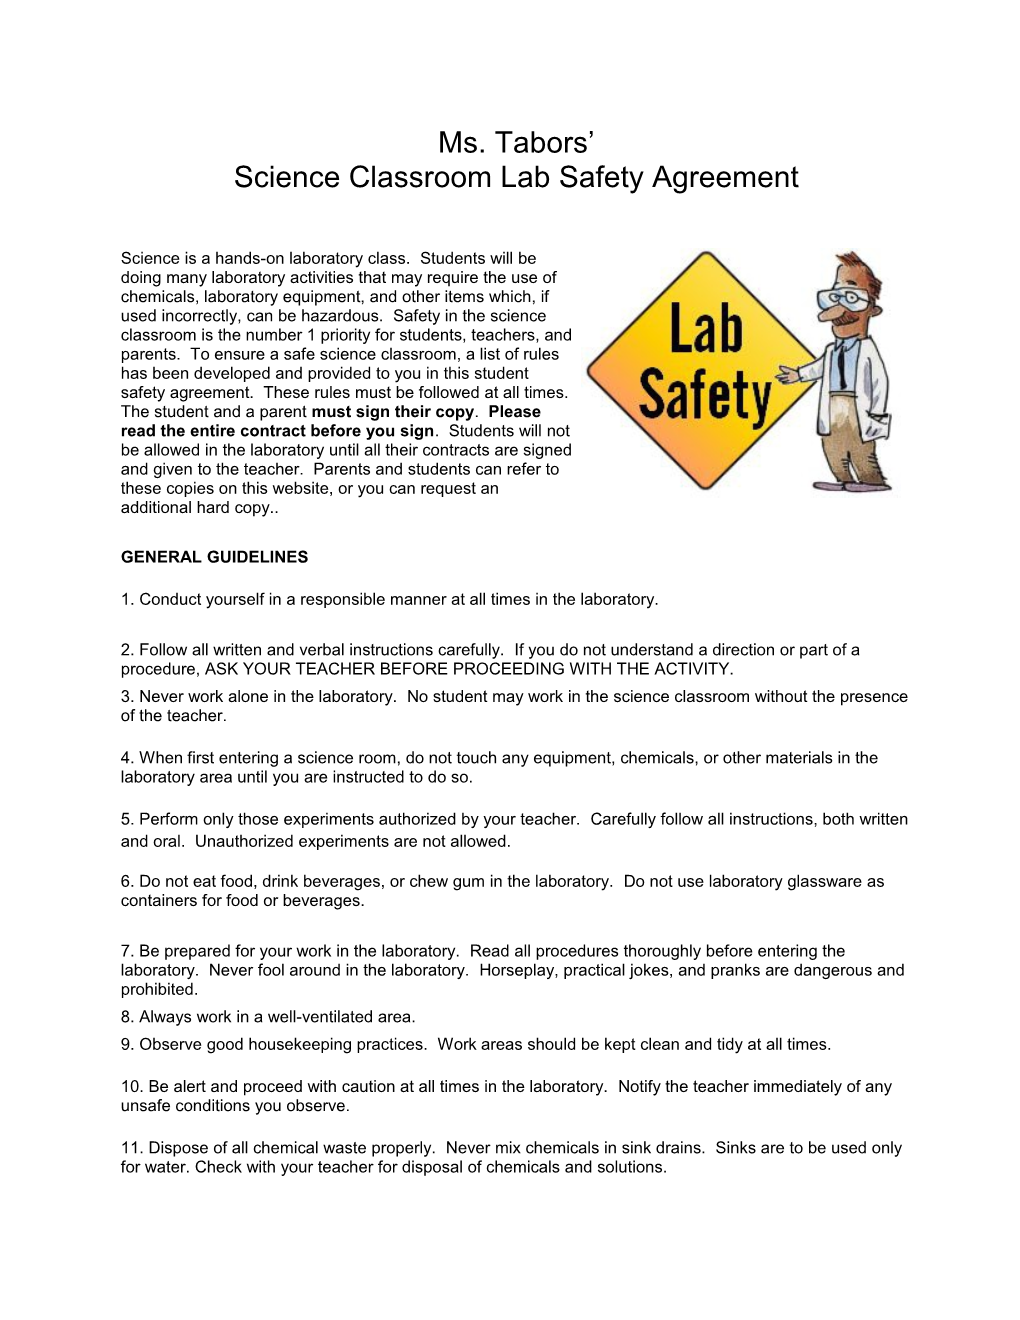 Ms. Tabors Science Classroom Lab Safety Agreement